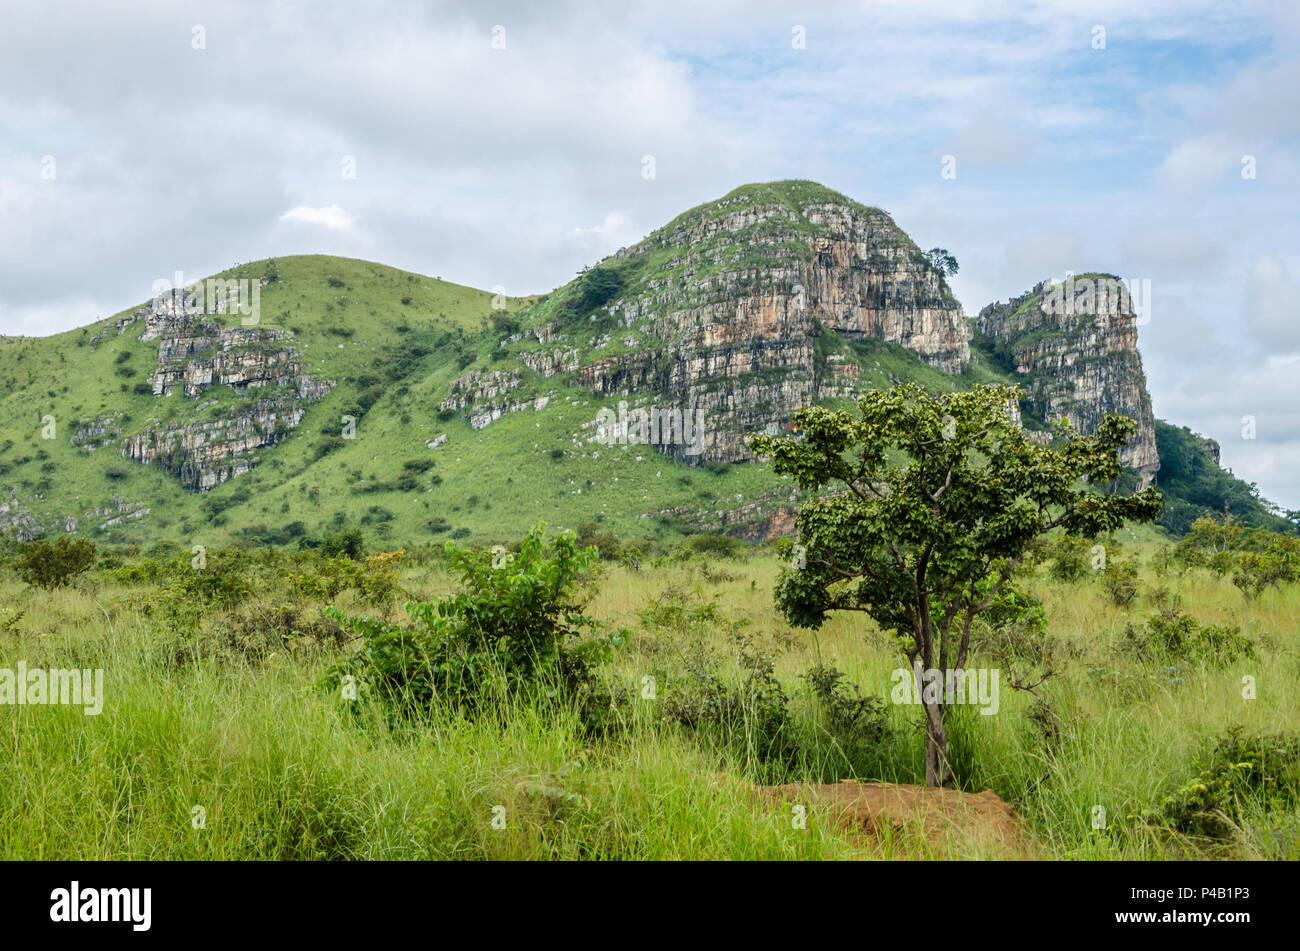 Rocky green mountain range with lush grass in foreground in landscape in northern Angola, Africa. Stock Photo